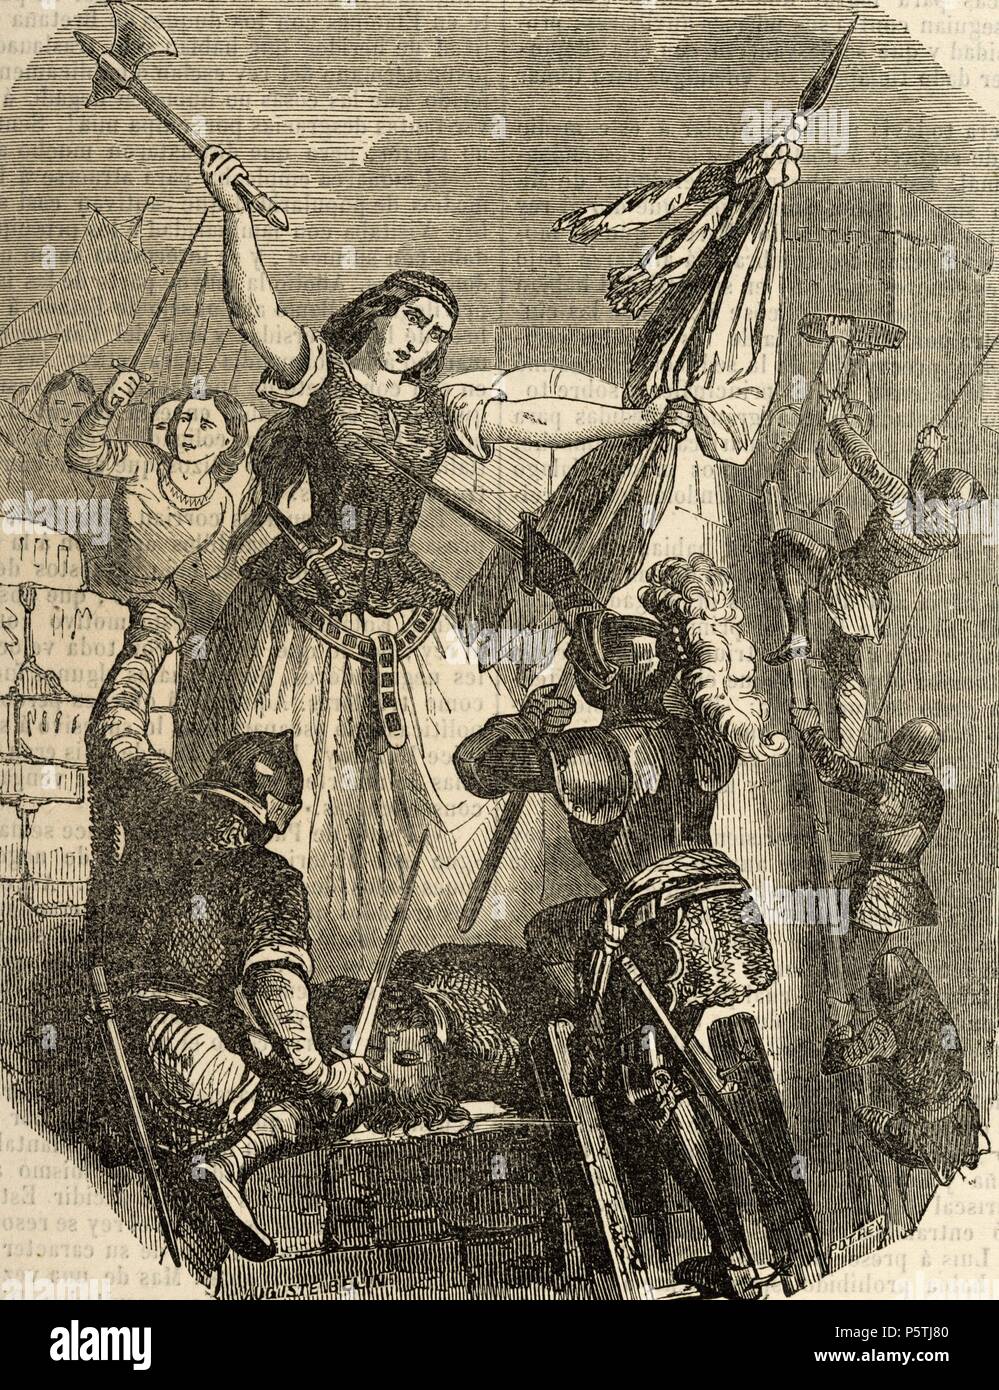 Jeanne Hachette (b.1456). French heroine. Jeanne Hachette during the Beauvais site, June 27, 1472. Engraving by Pothey. Popular Universal Library Editions, 1851. Stock Photo